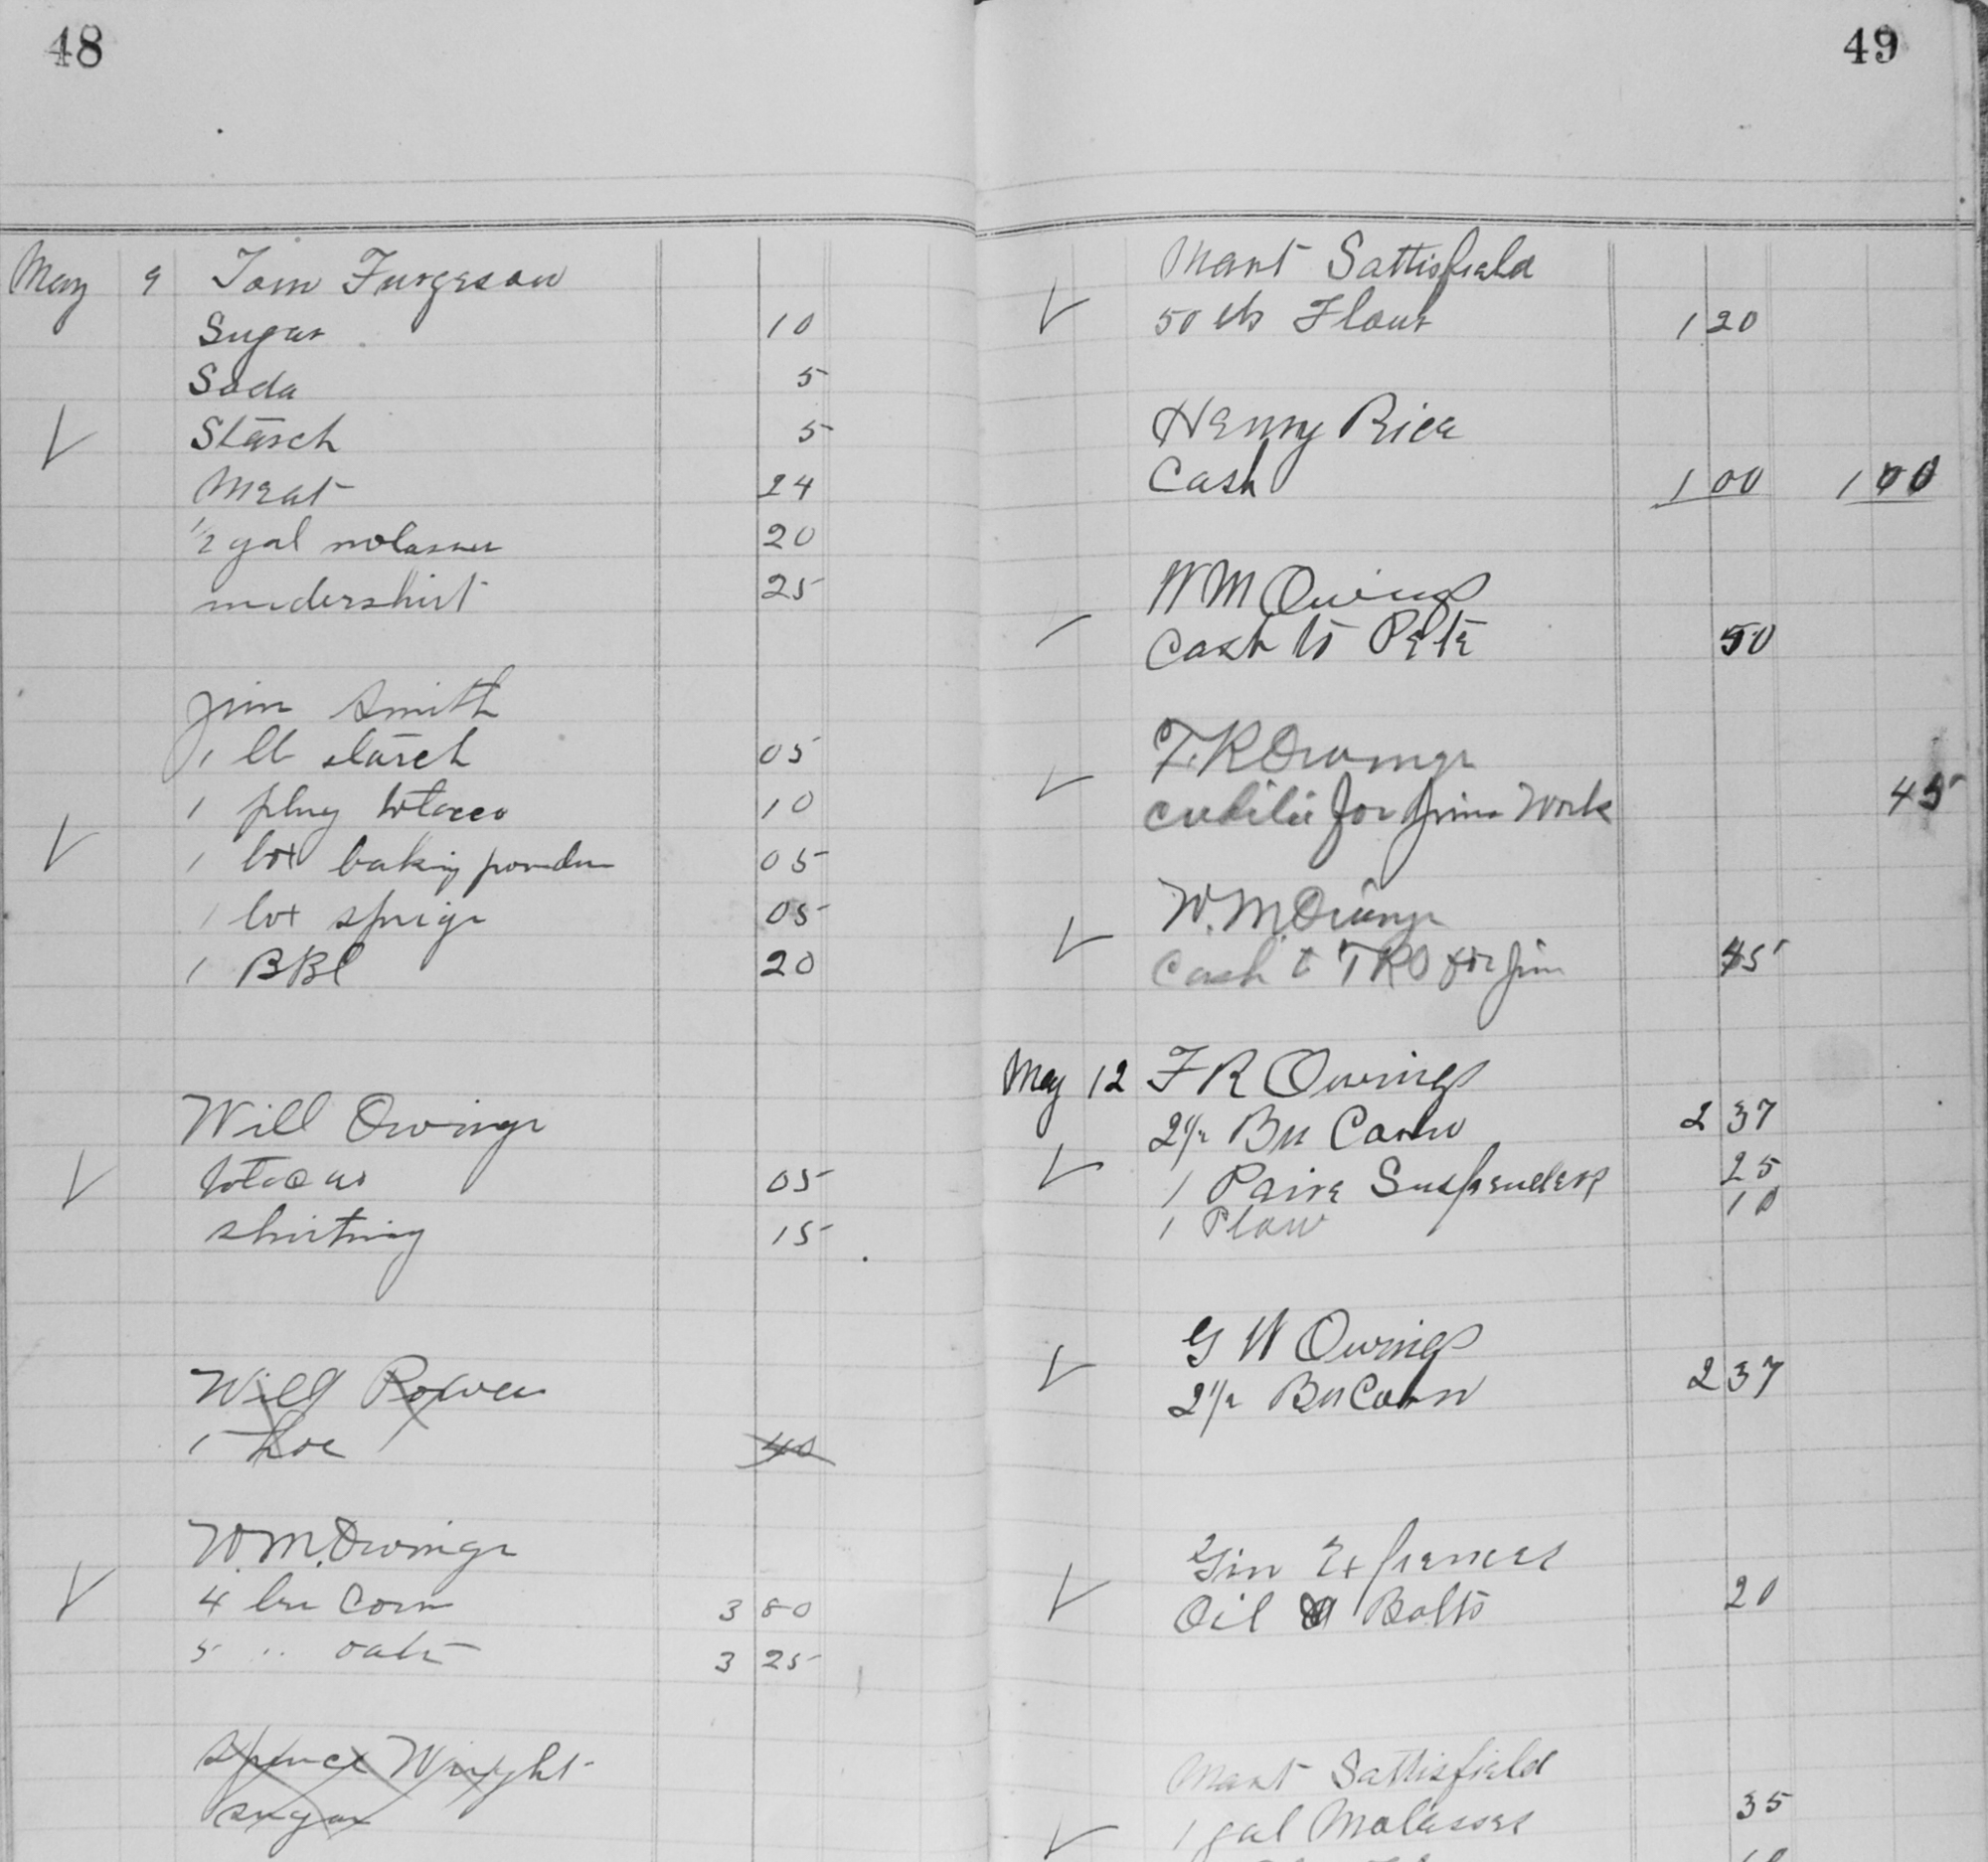 LEDGER PAGE FROM THE OWINGS STORE #2